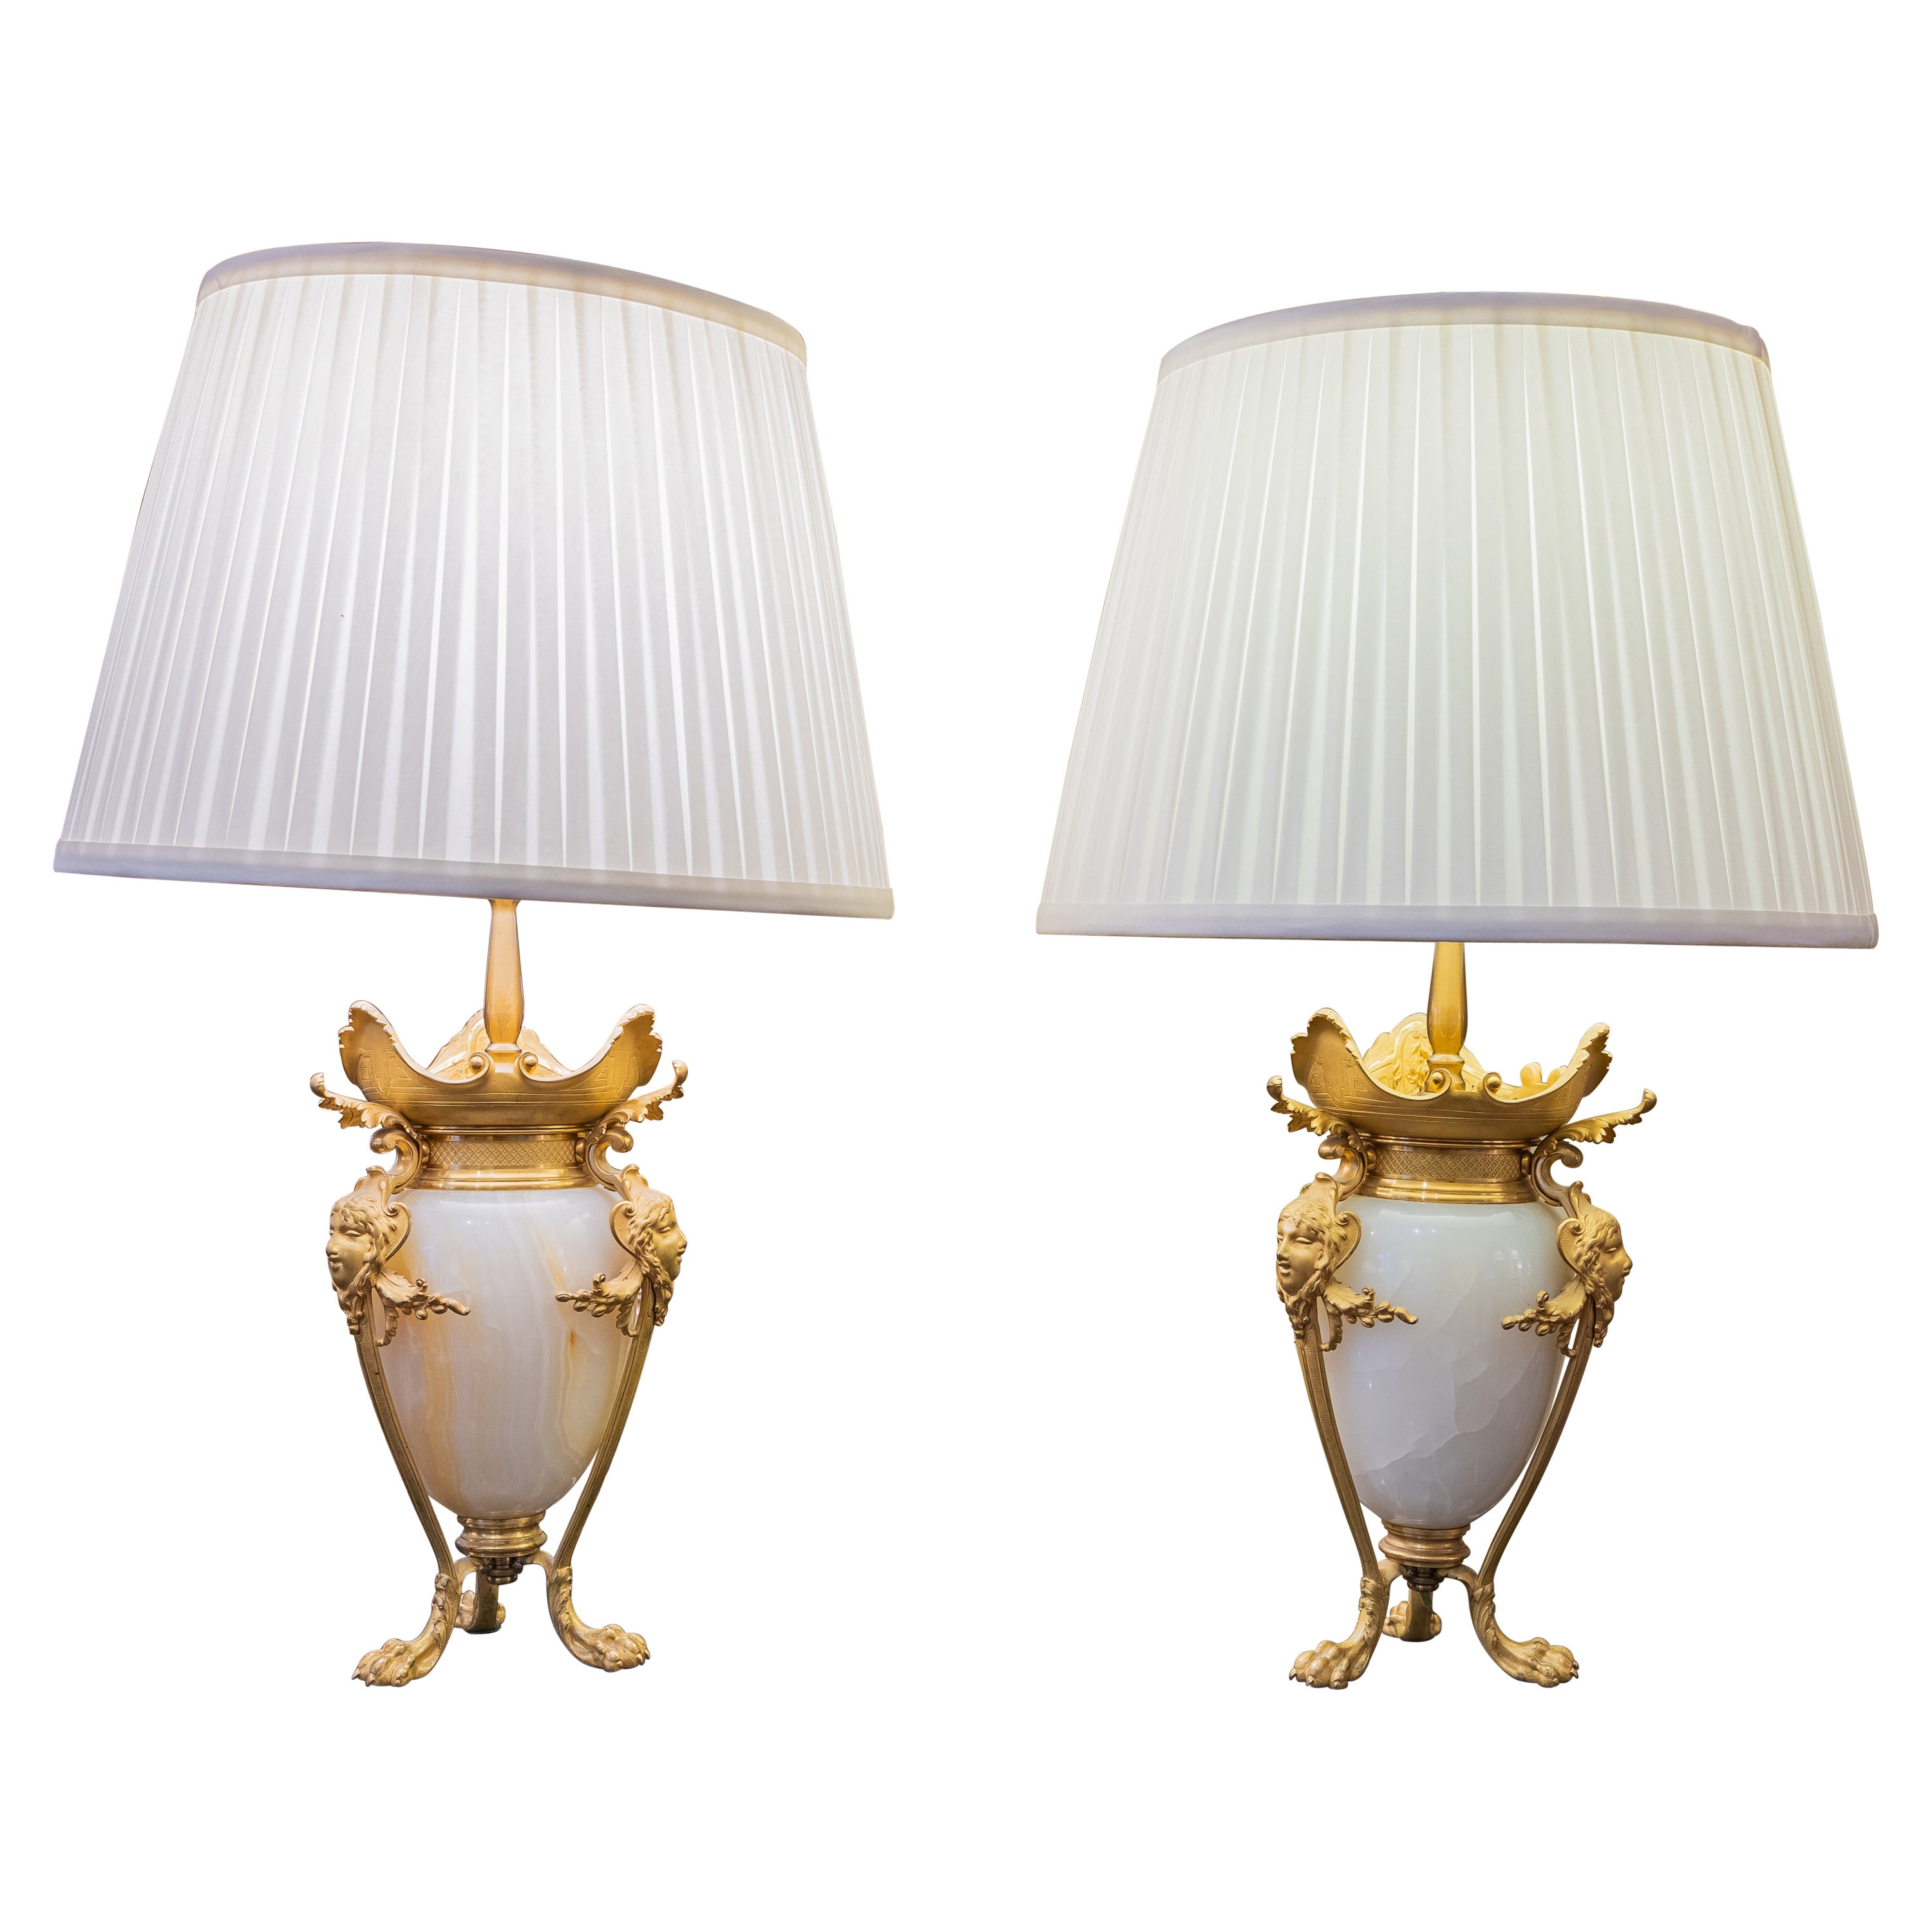 A fine pair of 19th c French alabaster and gilt bronze table lamps For Sale